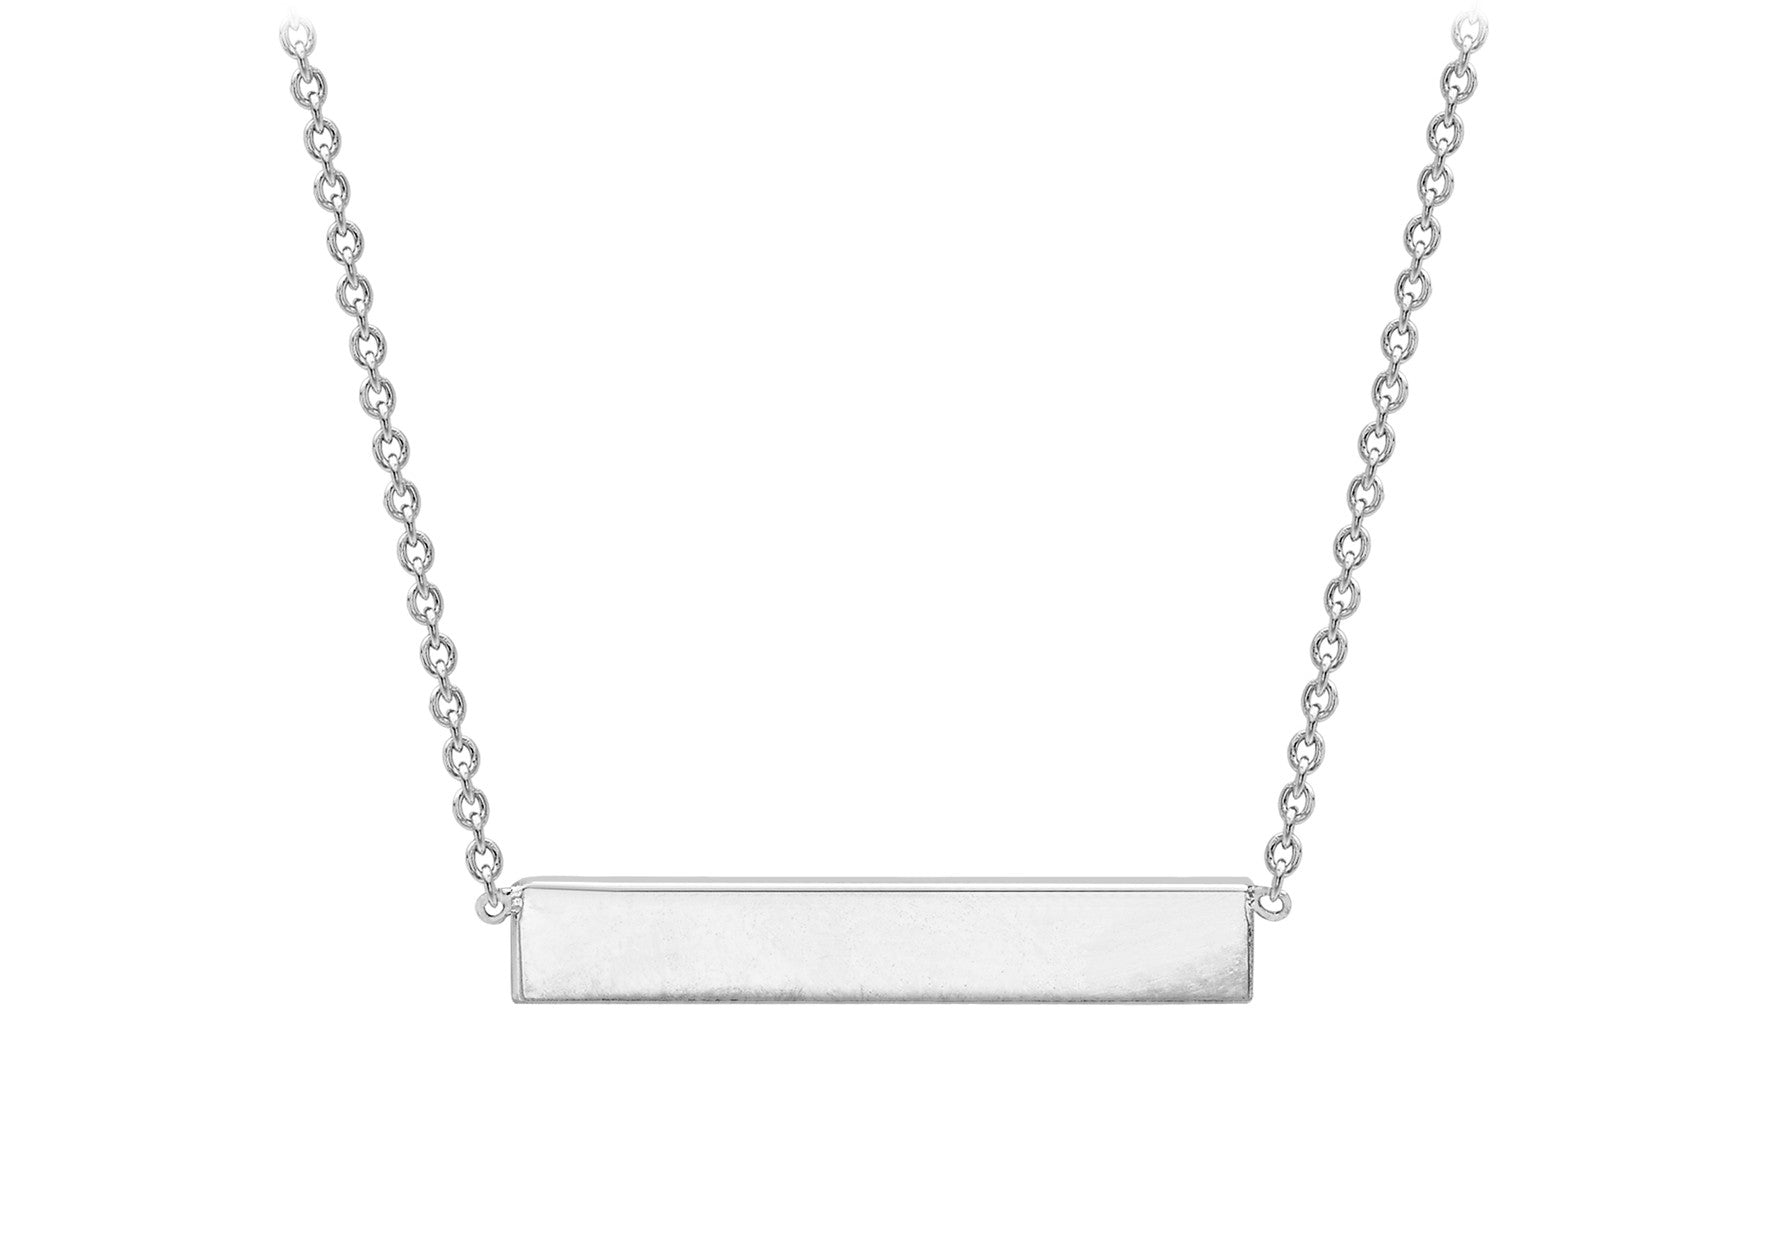 9ct White Gold Bar Necklace